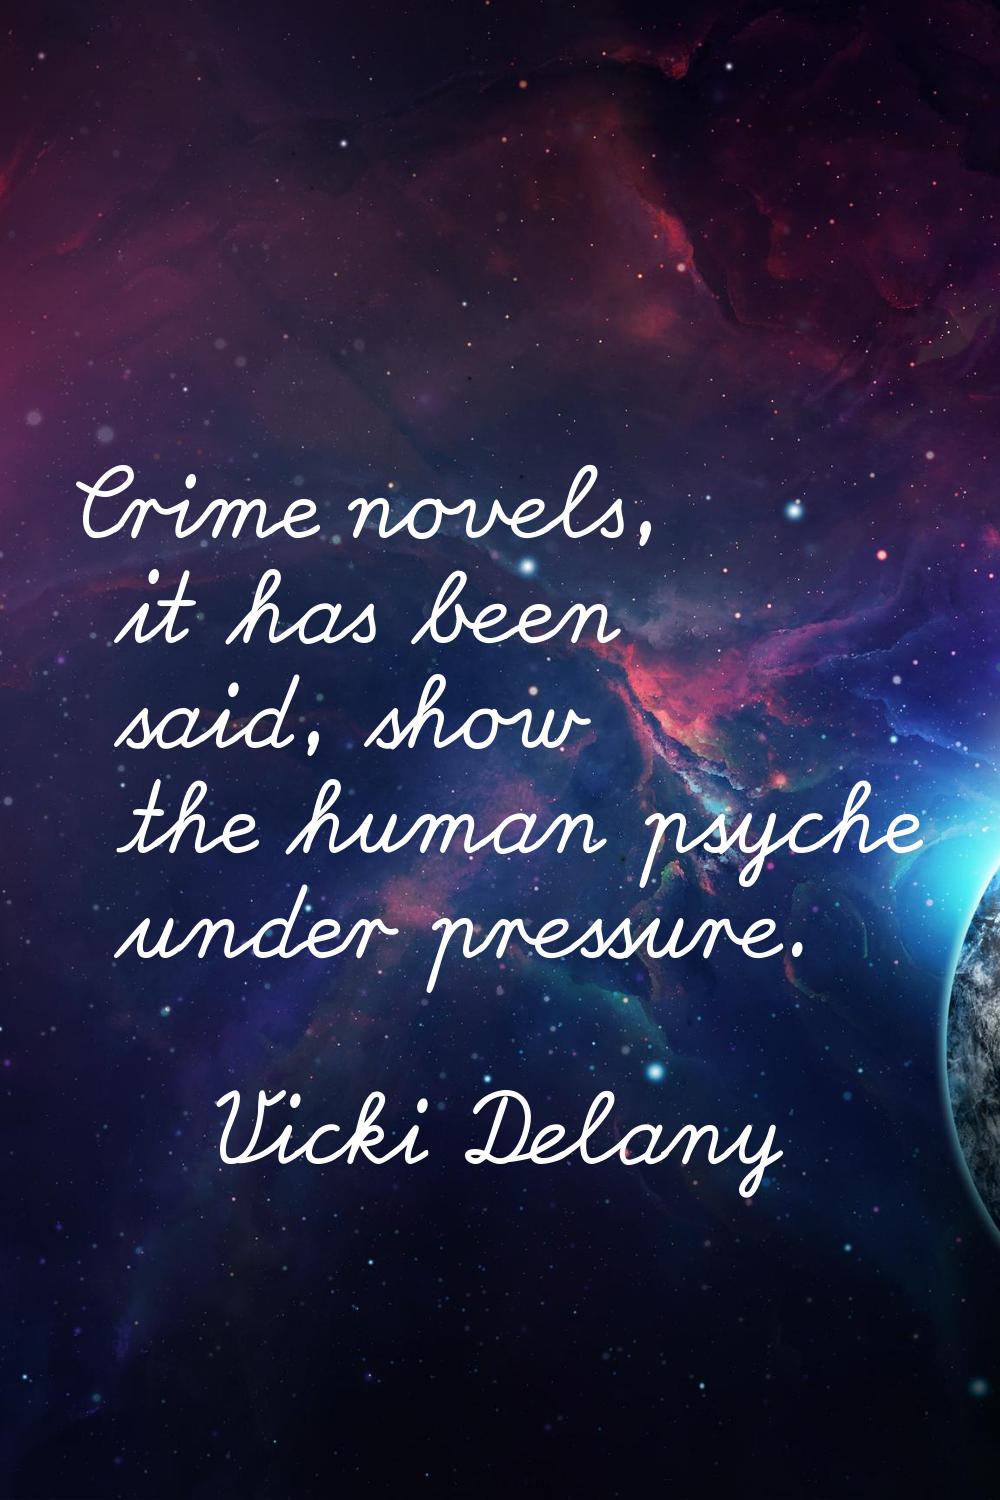 Crime novels, it has been said, show the human psyche under pressure.